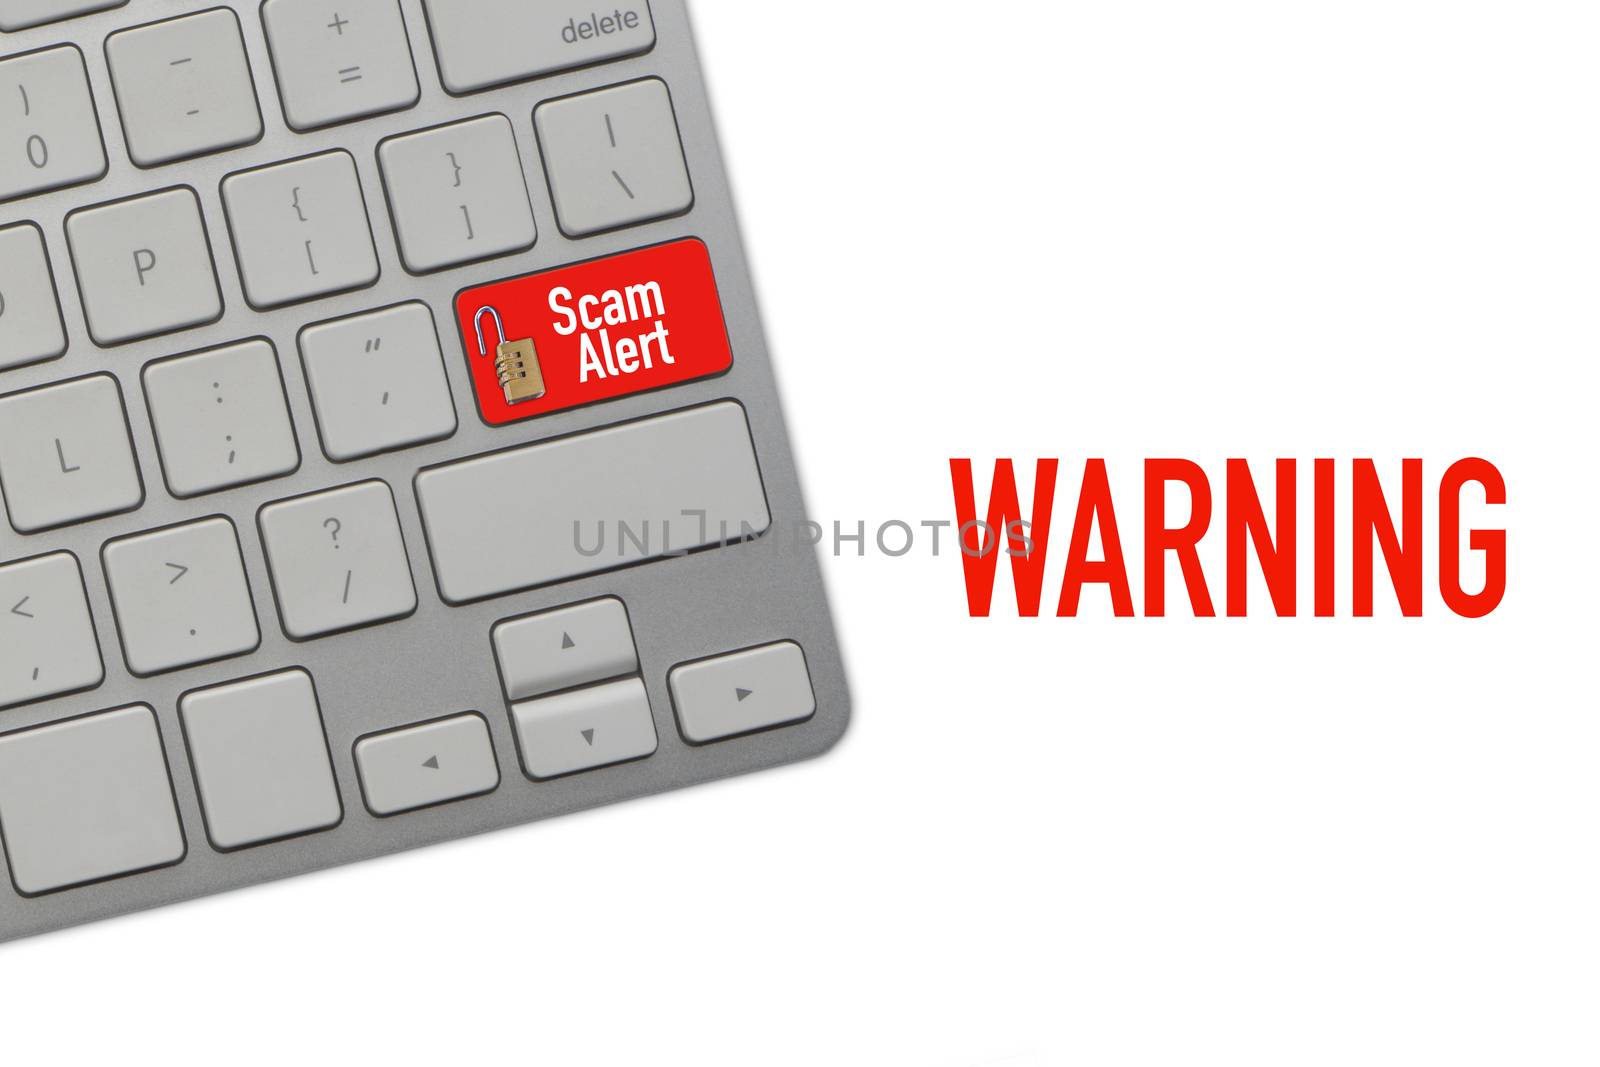 WARNING SCAM ALERT text on computer keyboard over white background by silverwings